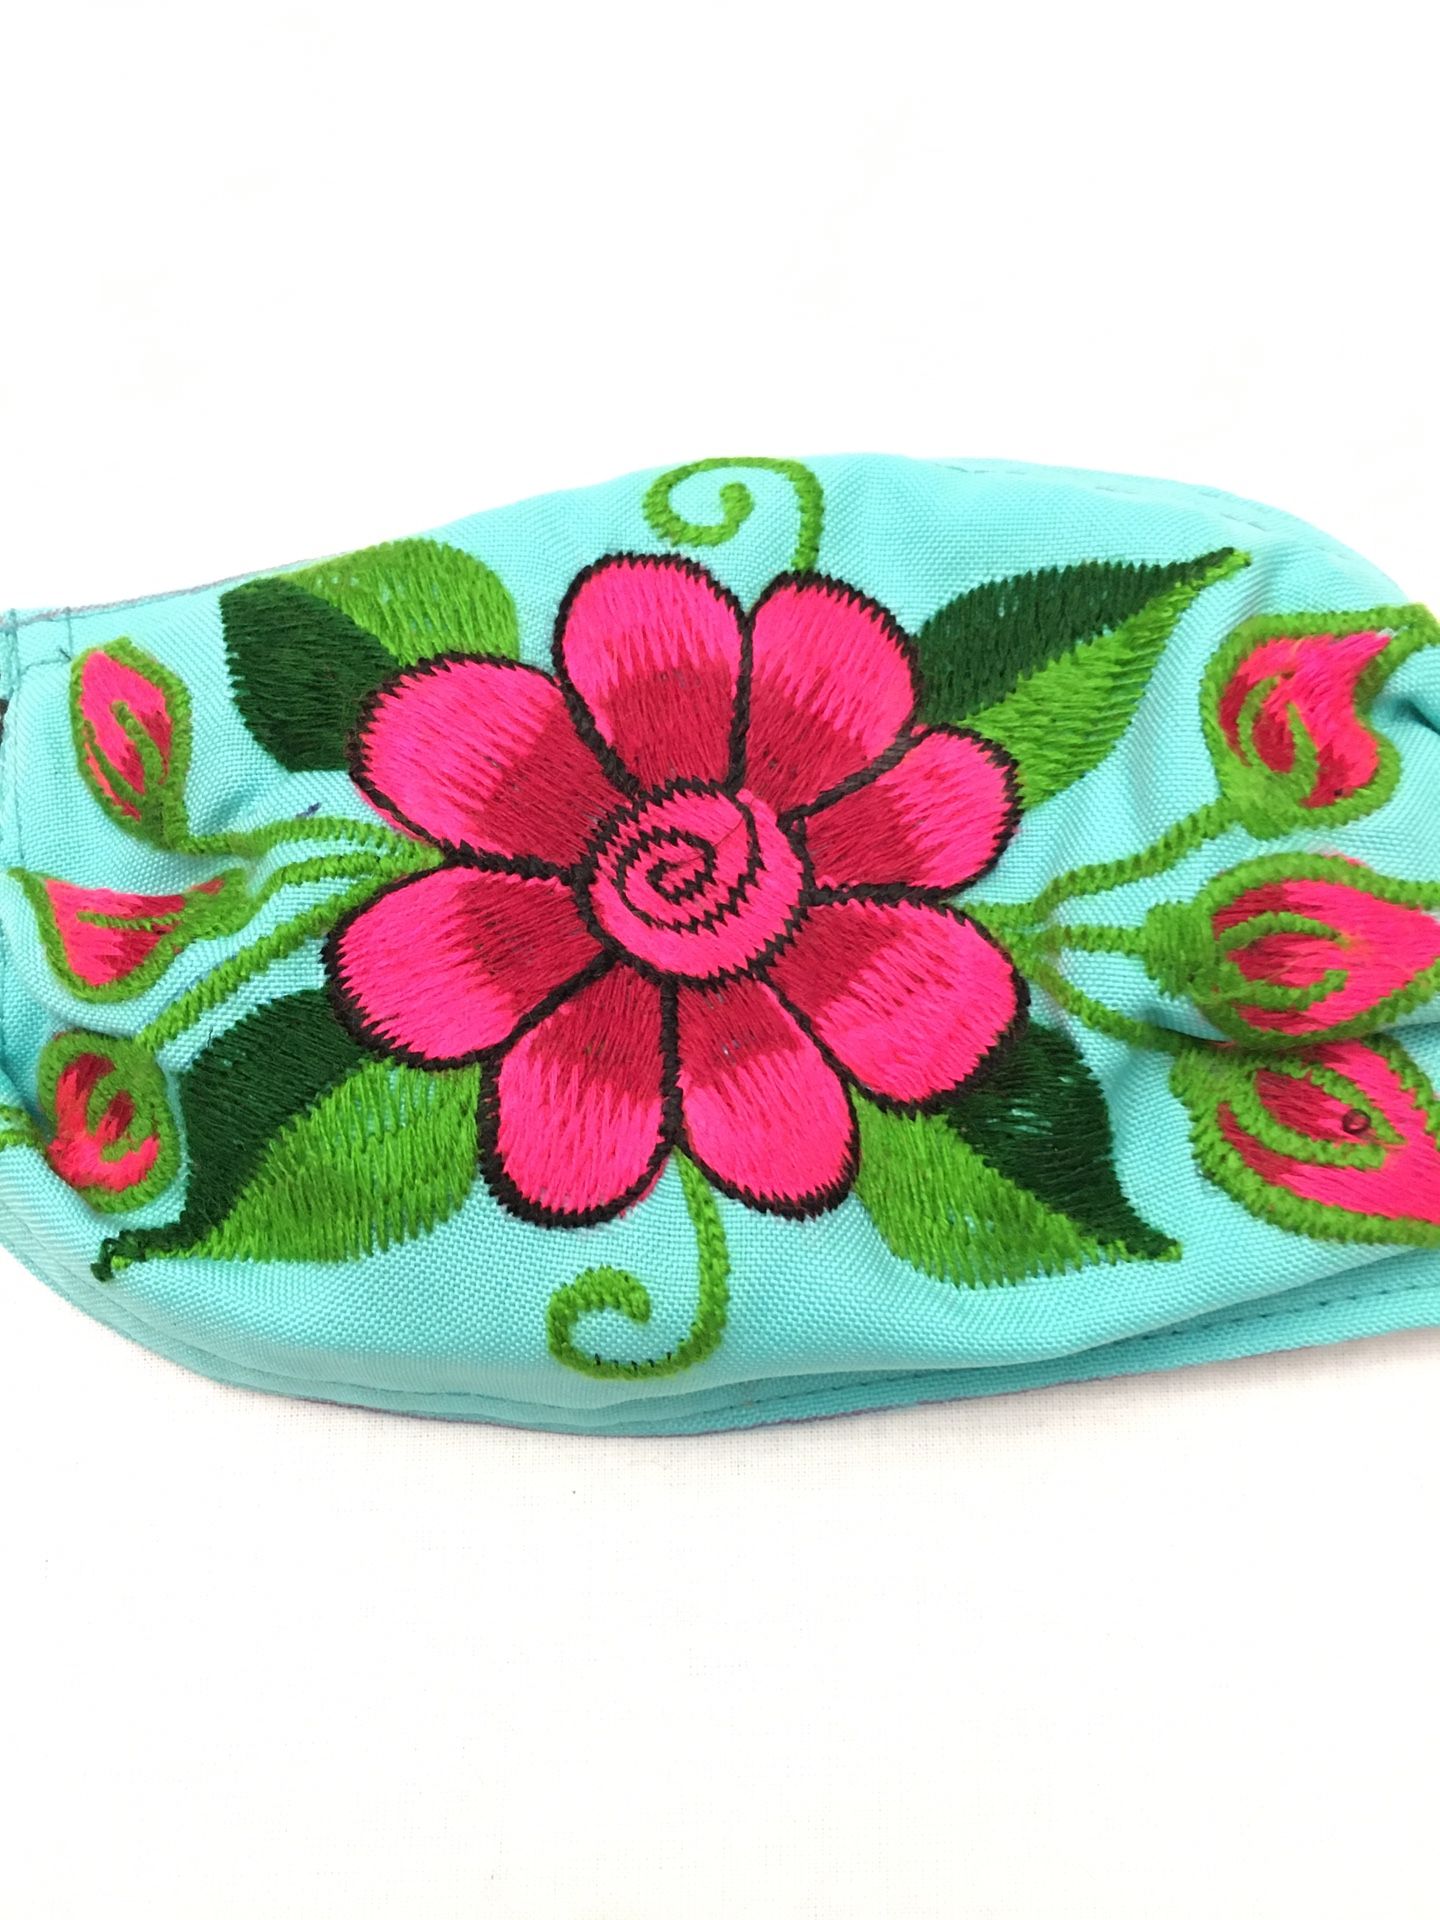 Face mask Mexico embroidered daisy flower 3 layers w/ filter